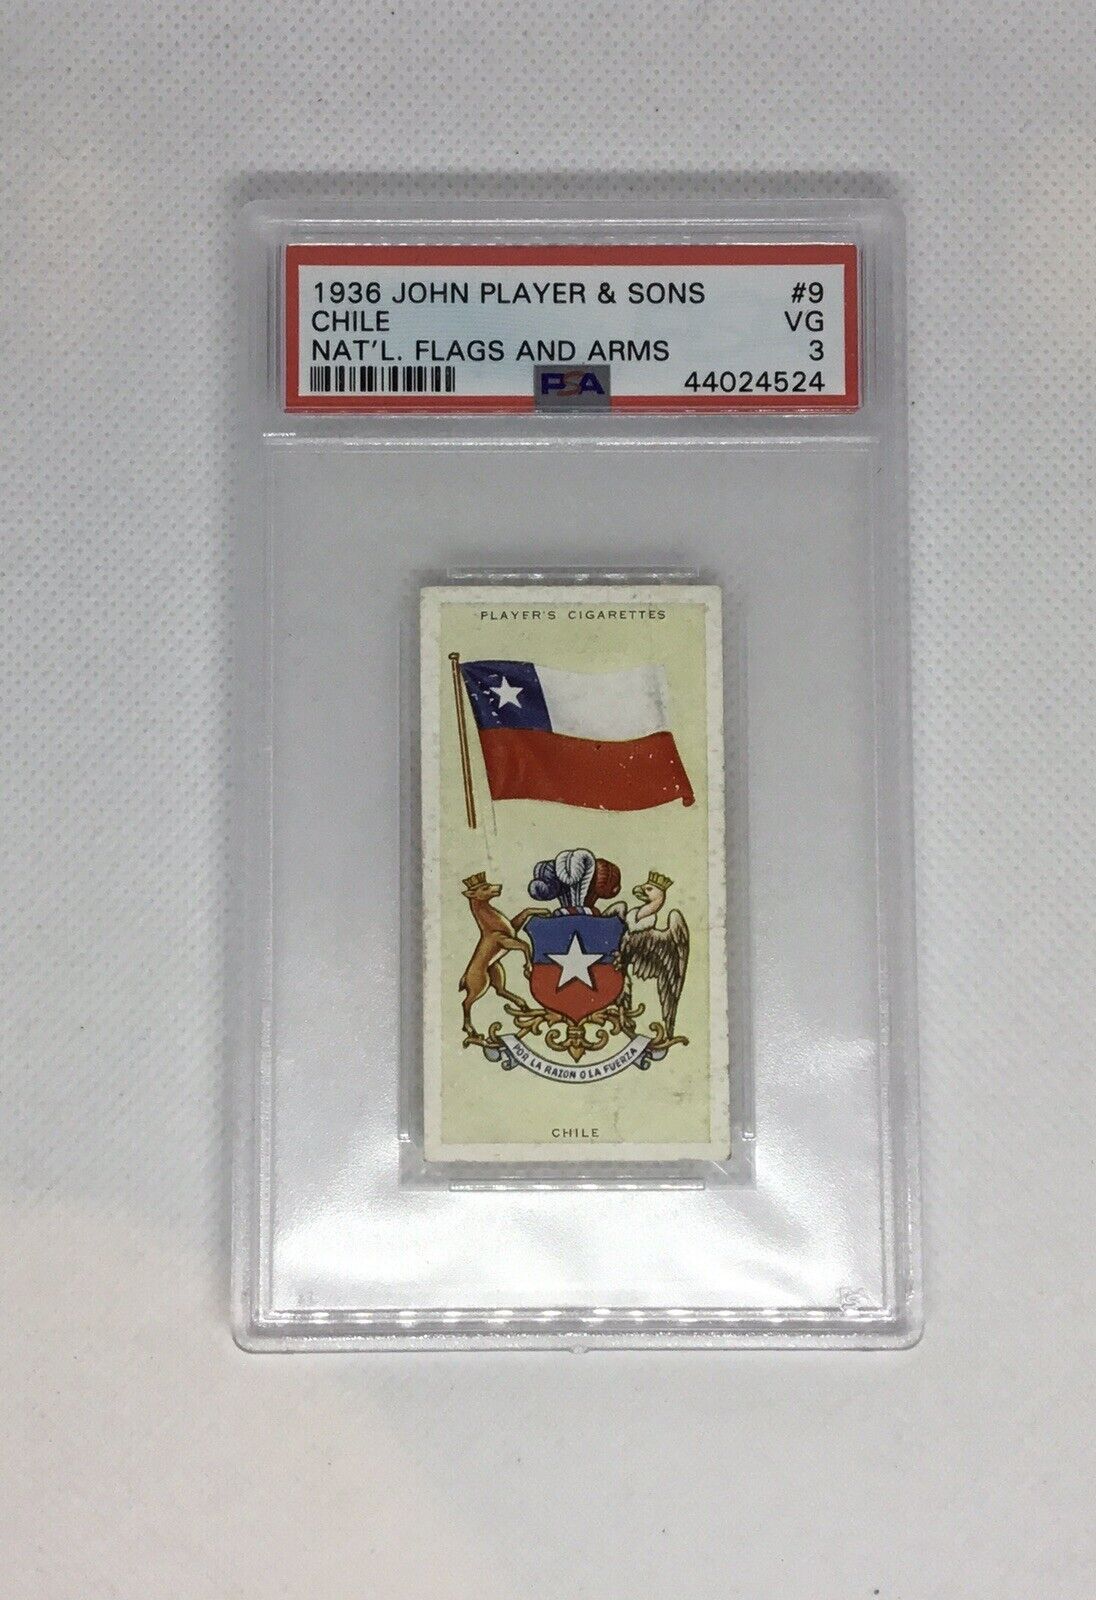 1936 John Player & Sons Chile Nat’l Flags and Arms PSA 3 POP 1 NONE HIGHER